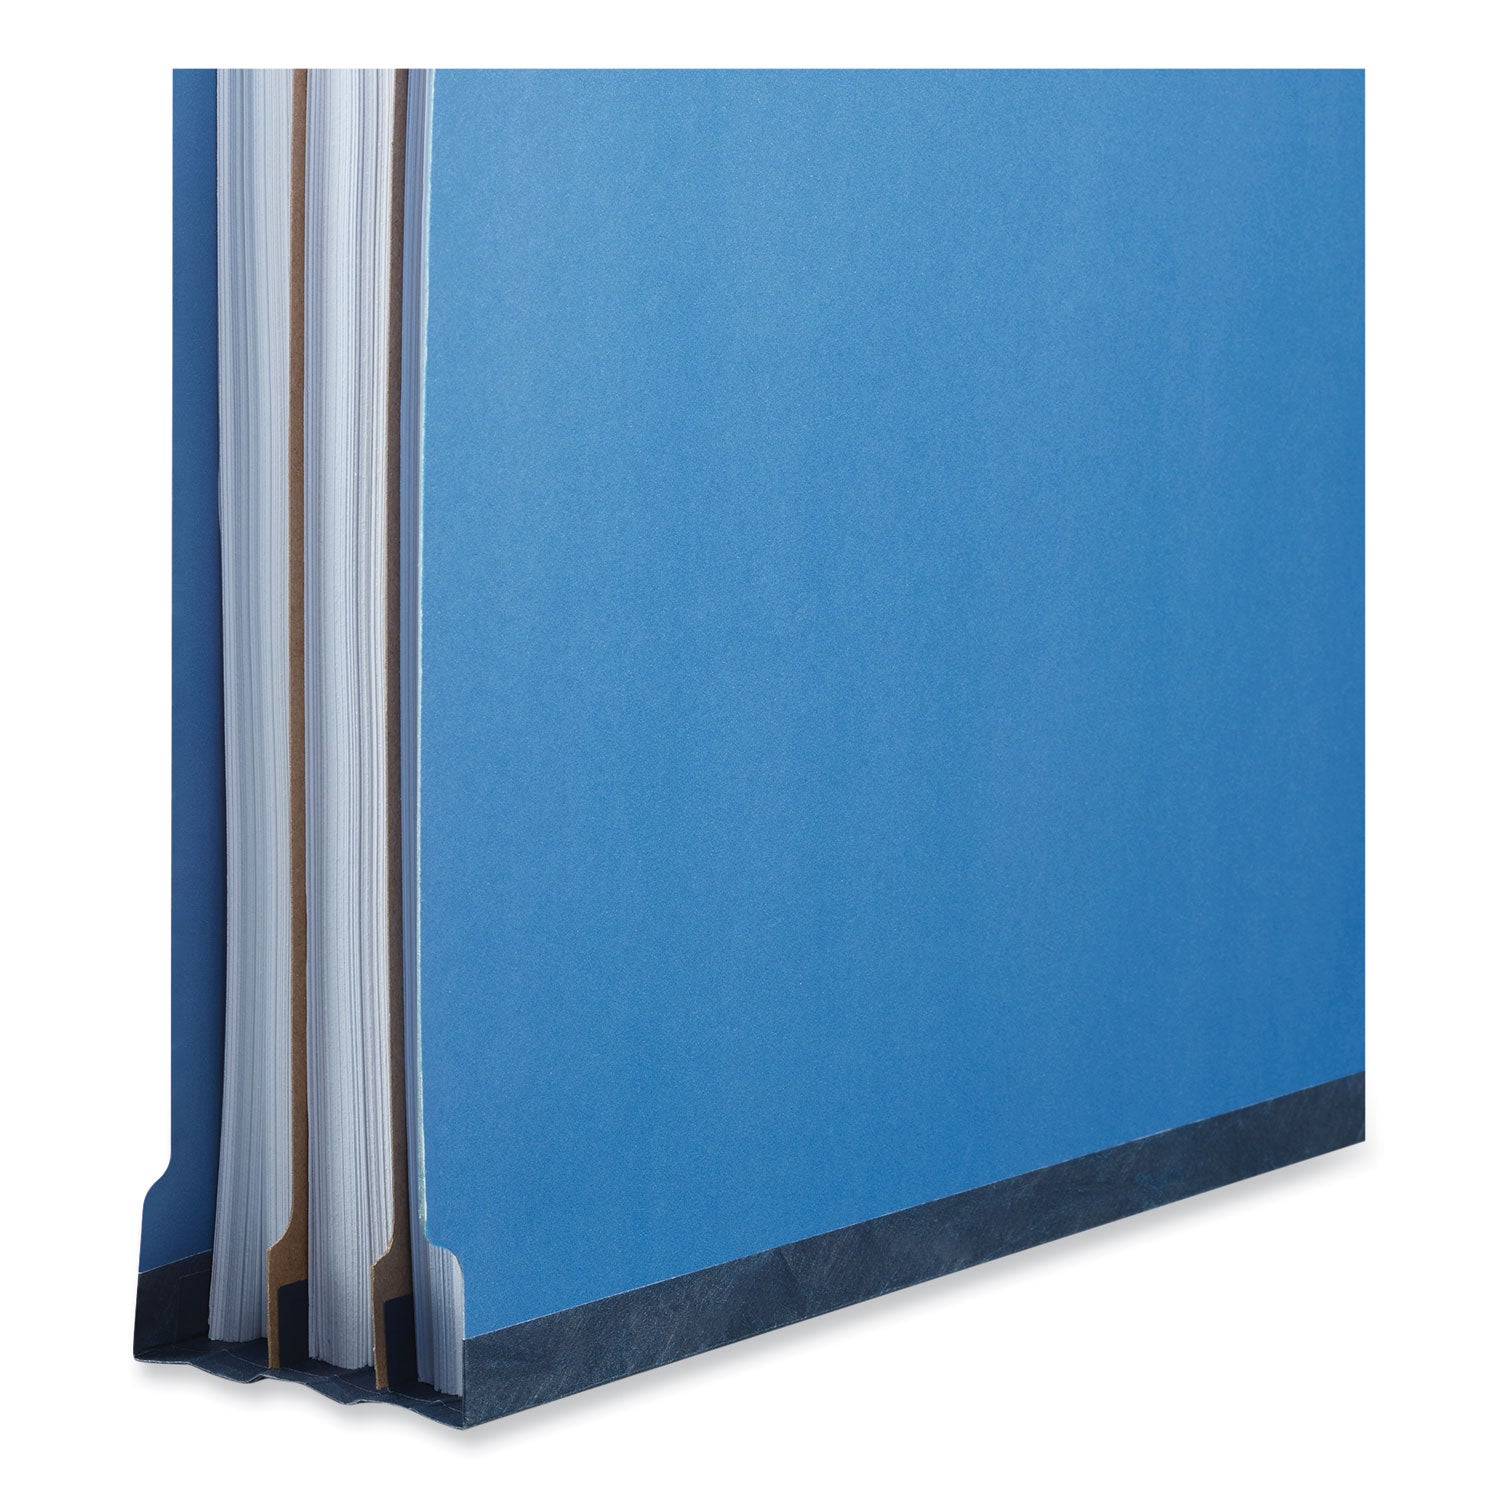 six-section-pressboard-classification-folders-25-expansion-2-dividers-6-fasteners-letter-size-blue-10-box_unv10410 - 3